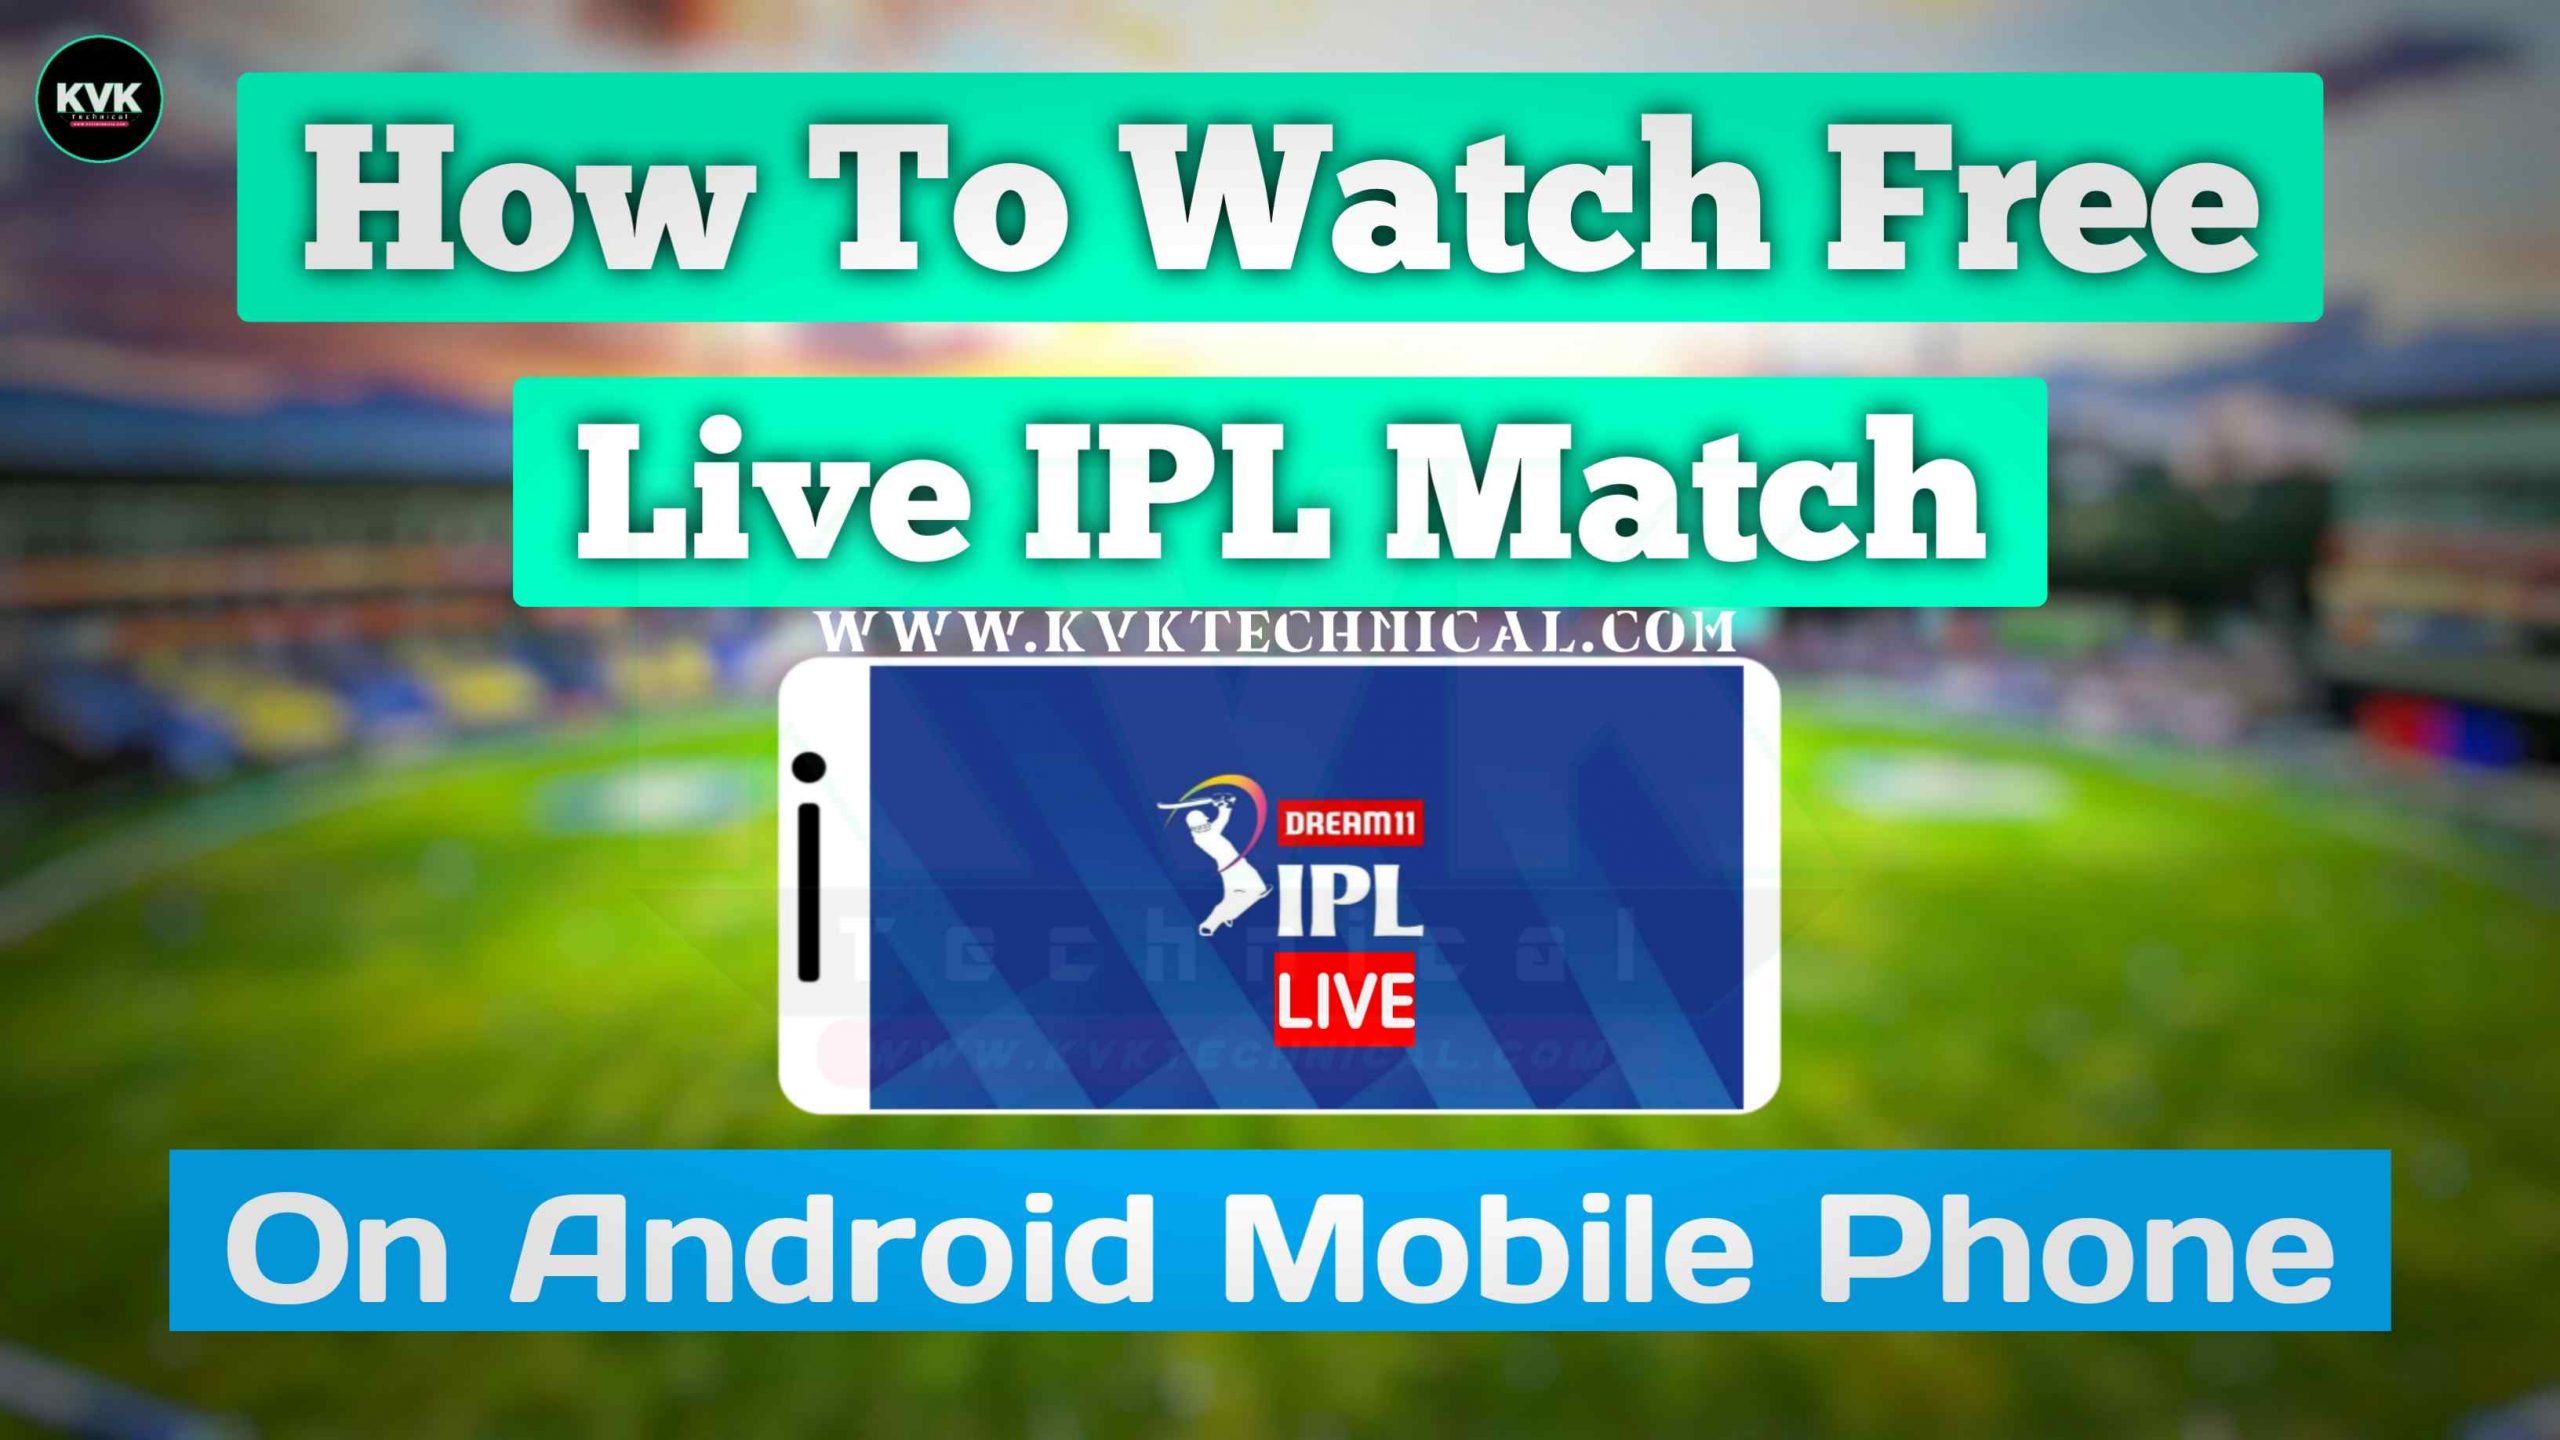 How To Watch Free IPL 2020 Live Match On Android Mobile Phone